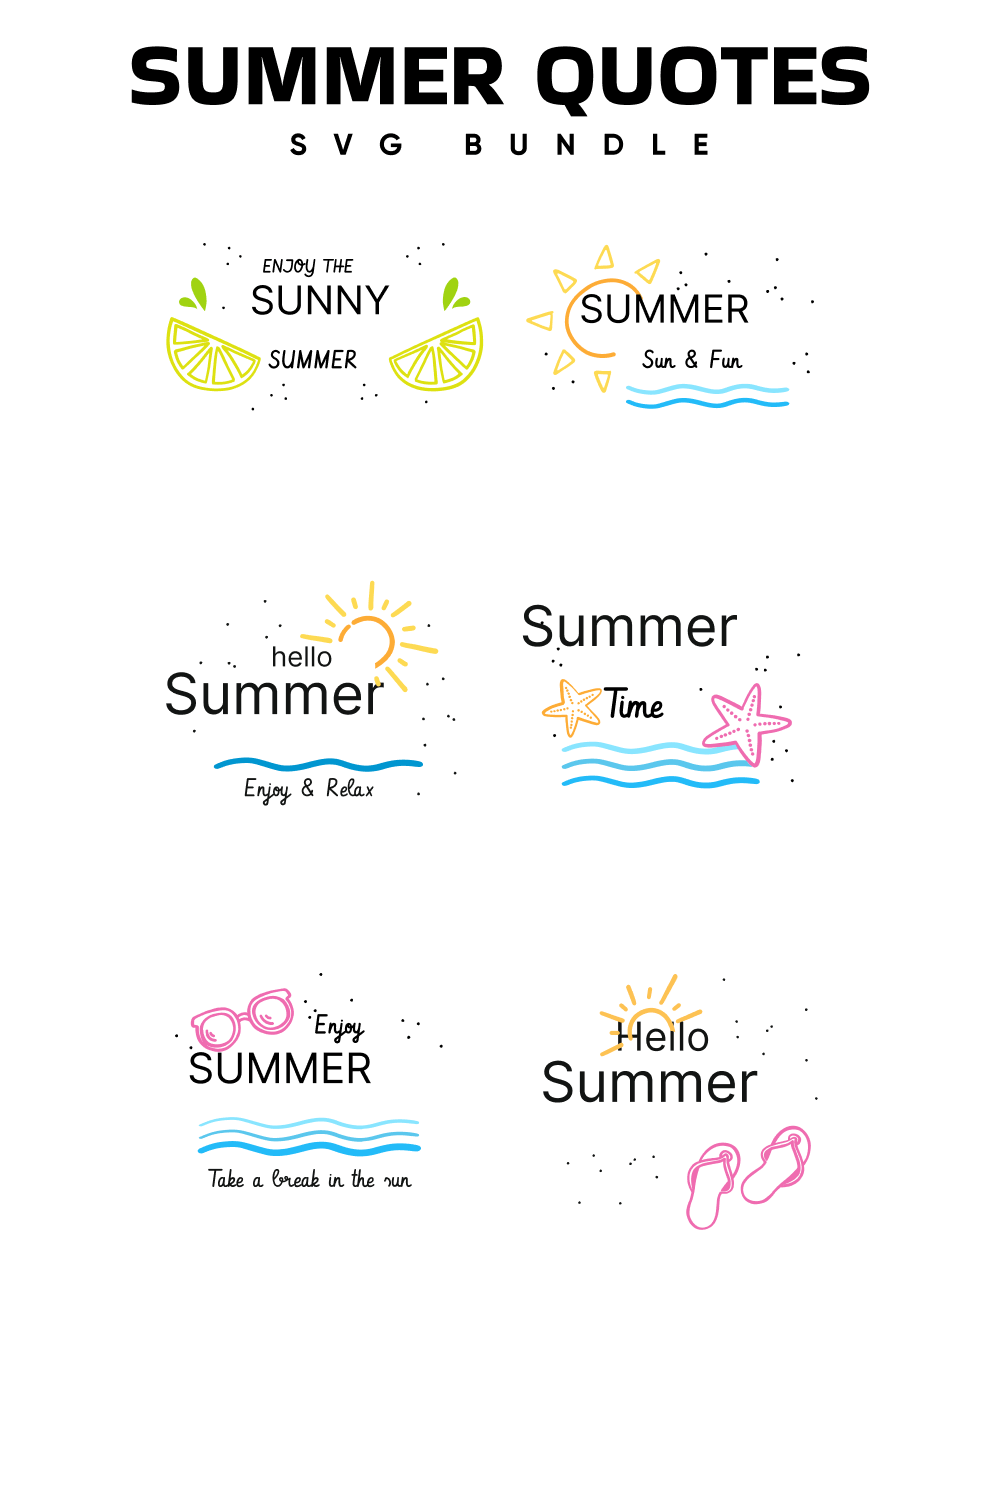 Summer quotes SVG with summer design.